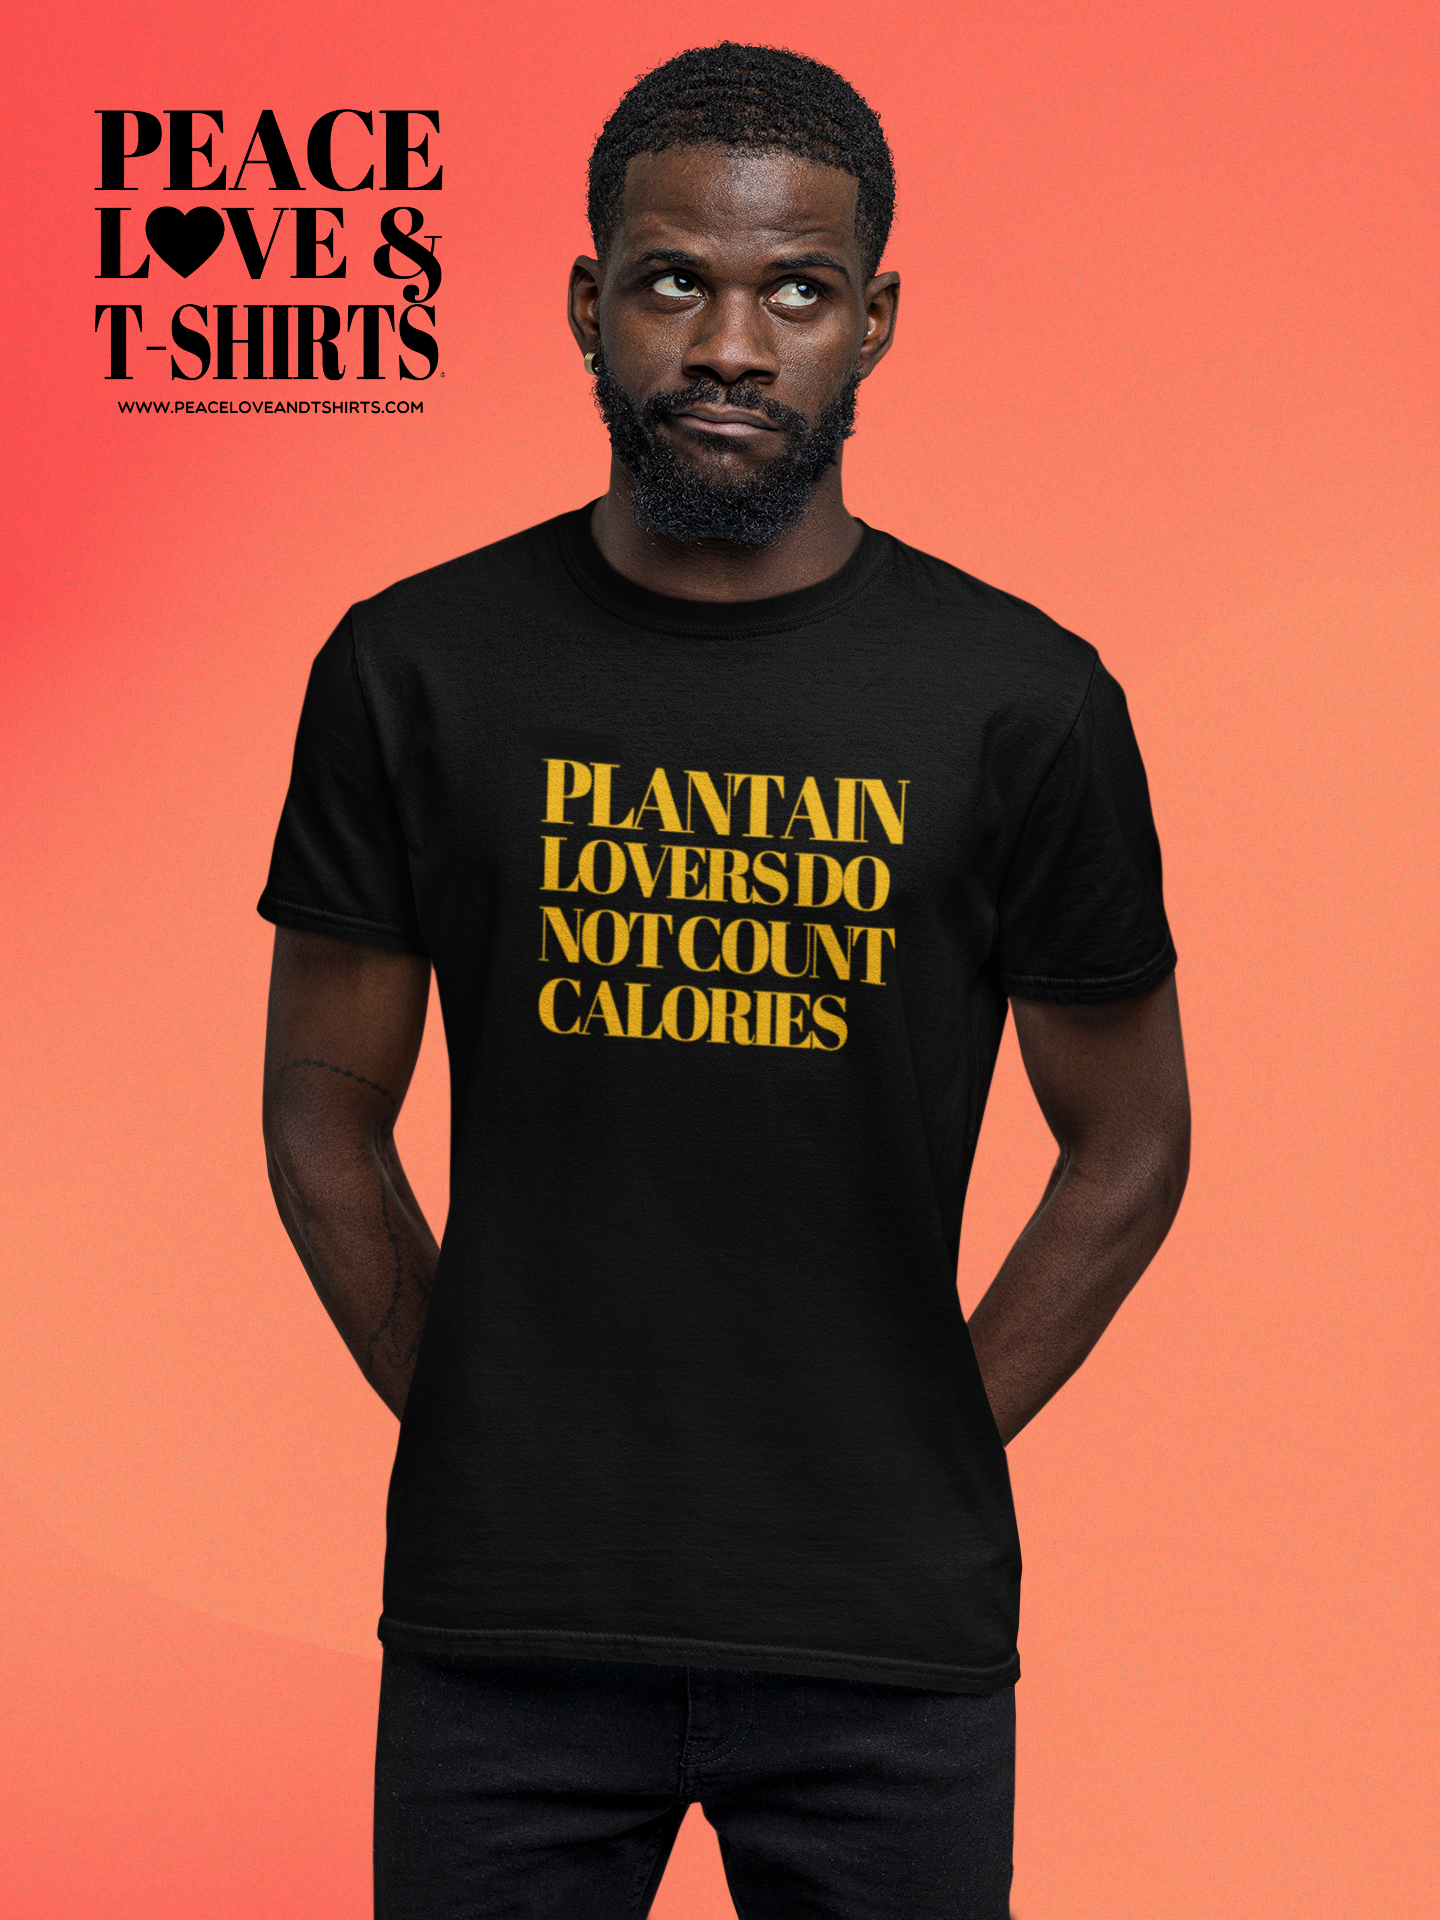 Plantain Lovers Do Not Count Calories Short-Sleeve Unisex T-Shirt